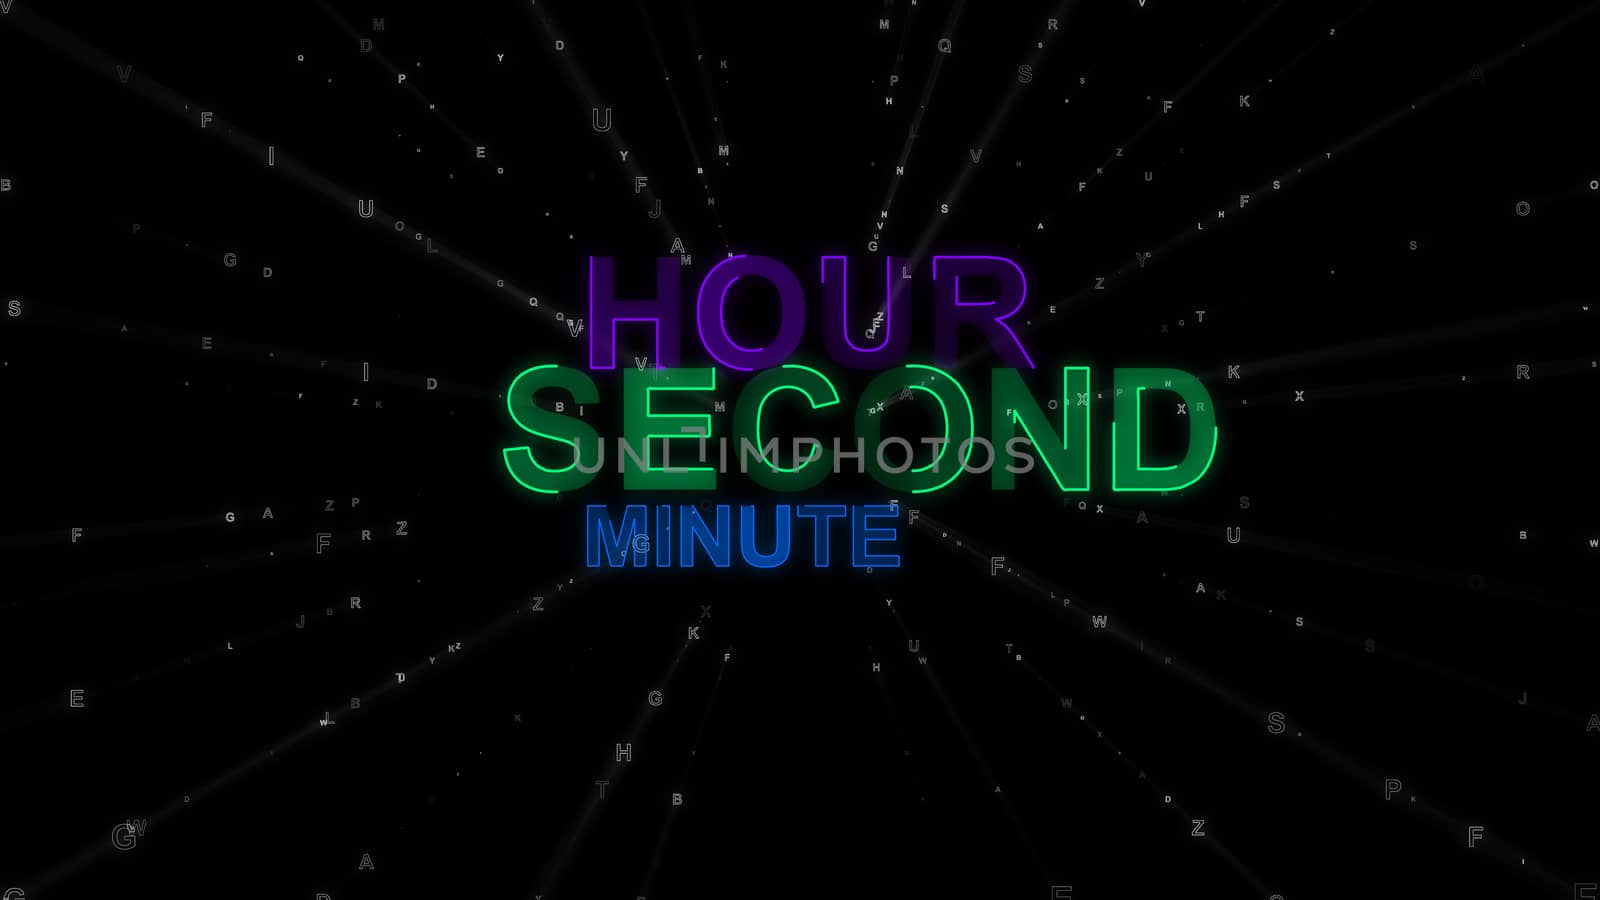 Hour, Minute, Second as Concept Words by klss